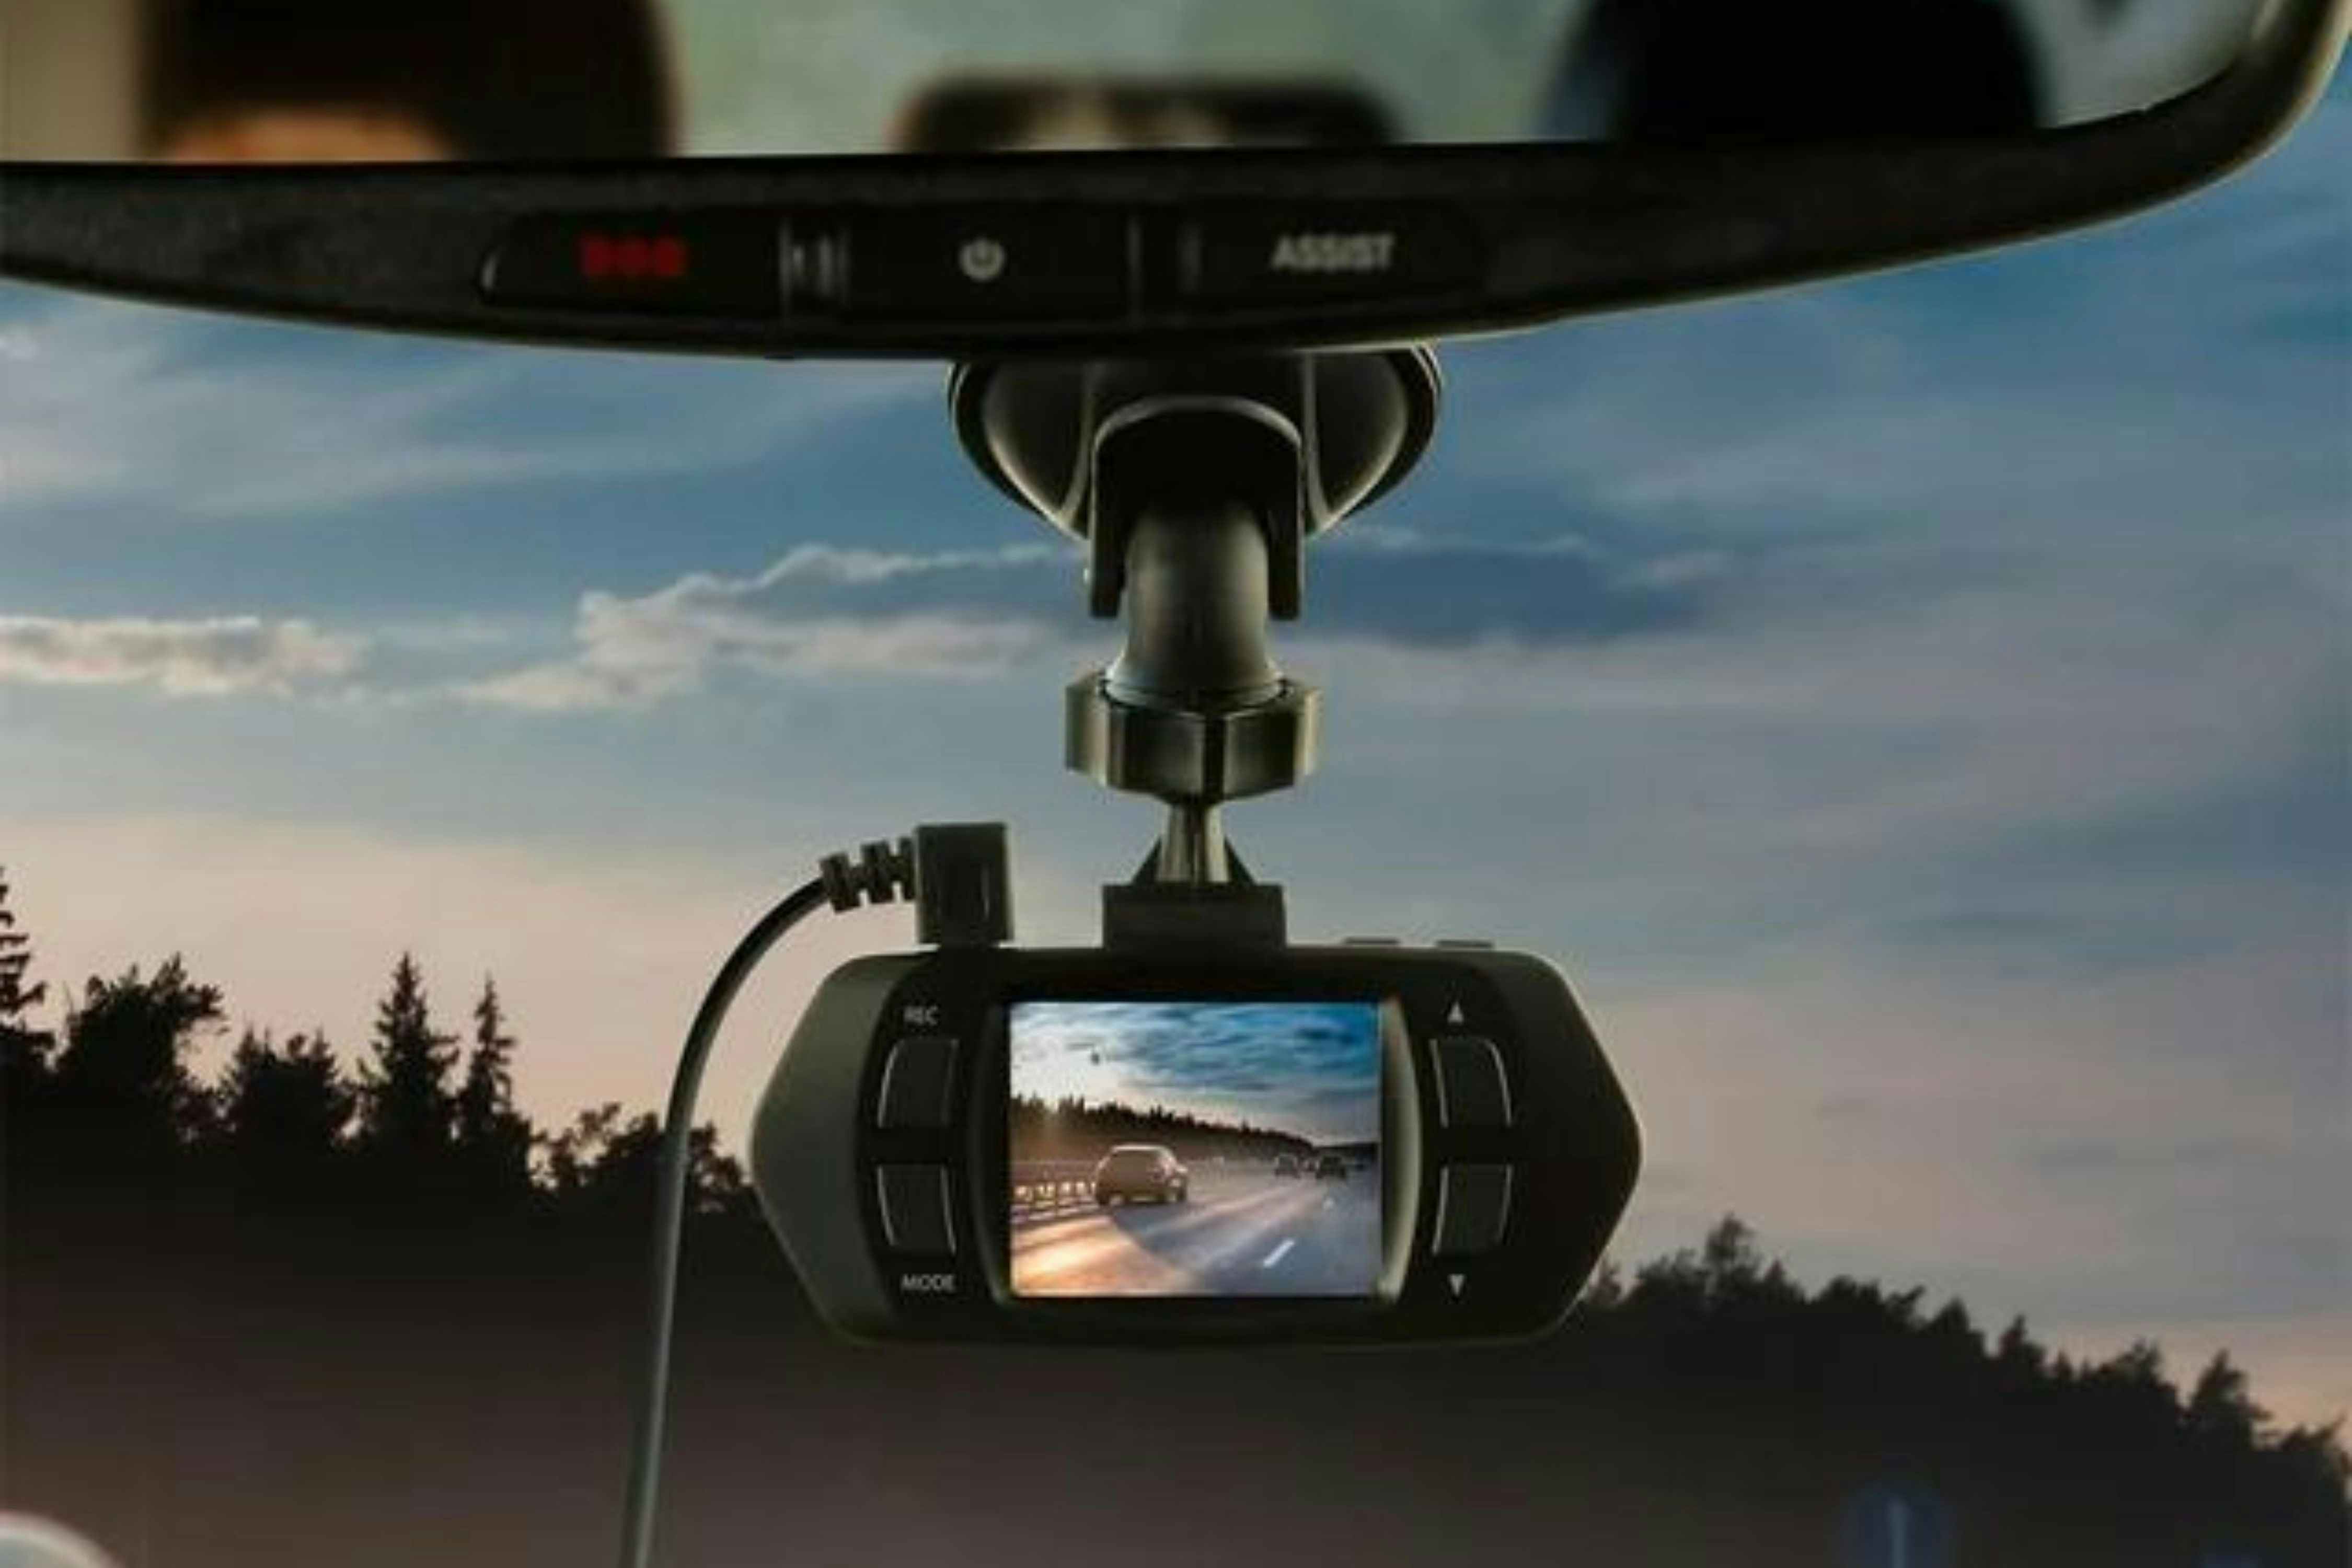 Buy a Dash Cam for Only $3.91 at Walmart